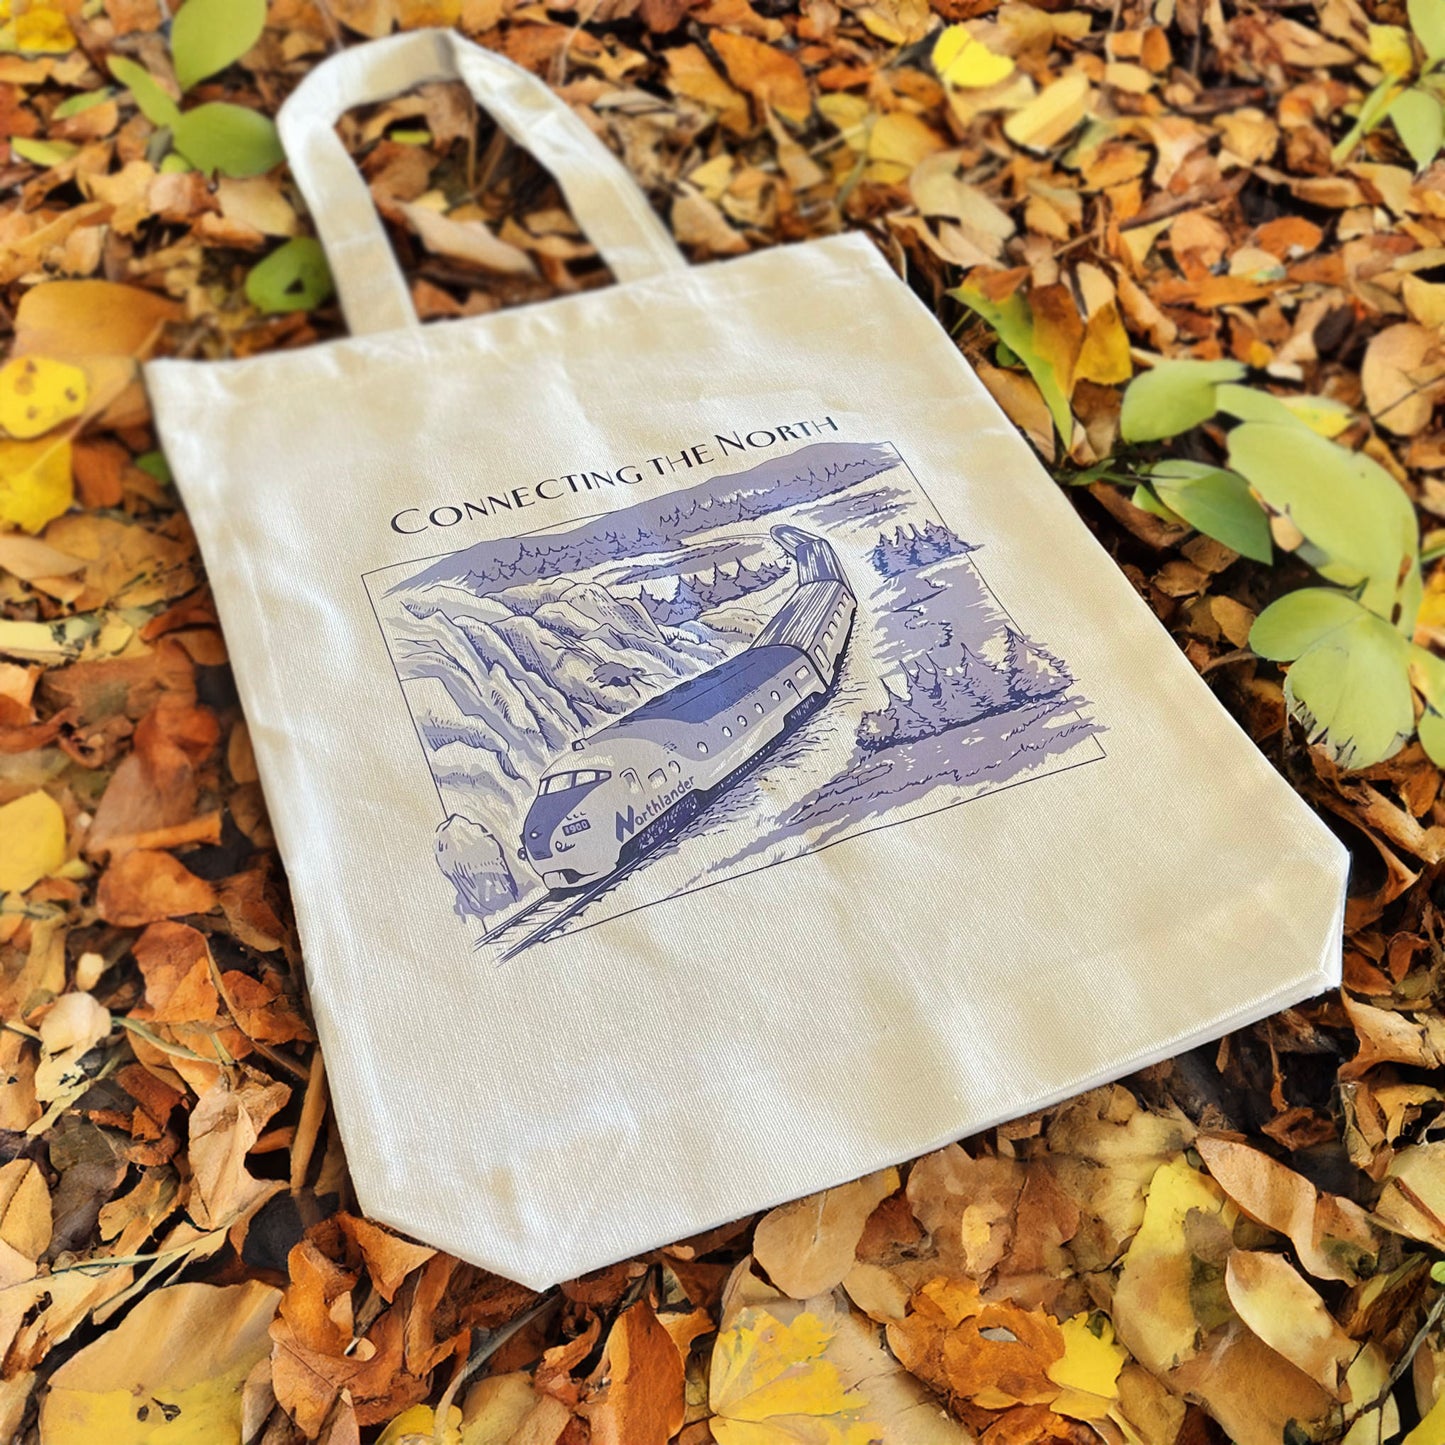 Connecting the North Tote Bag